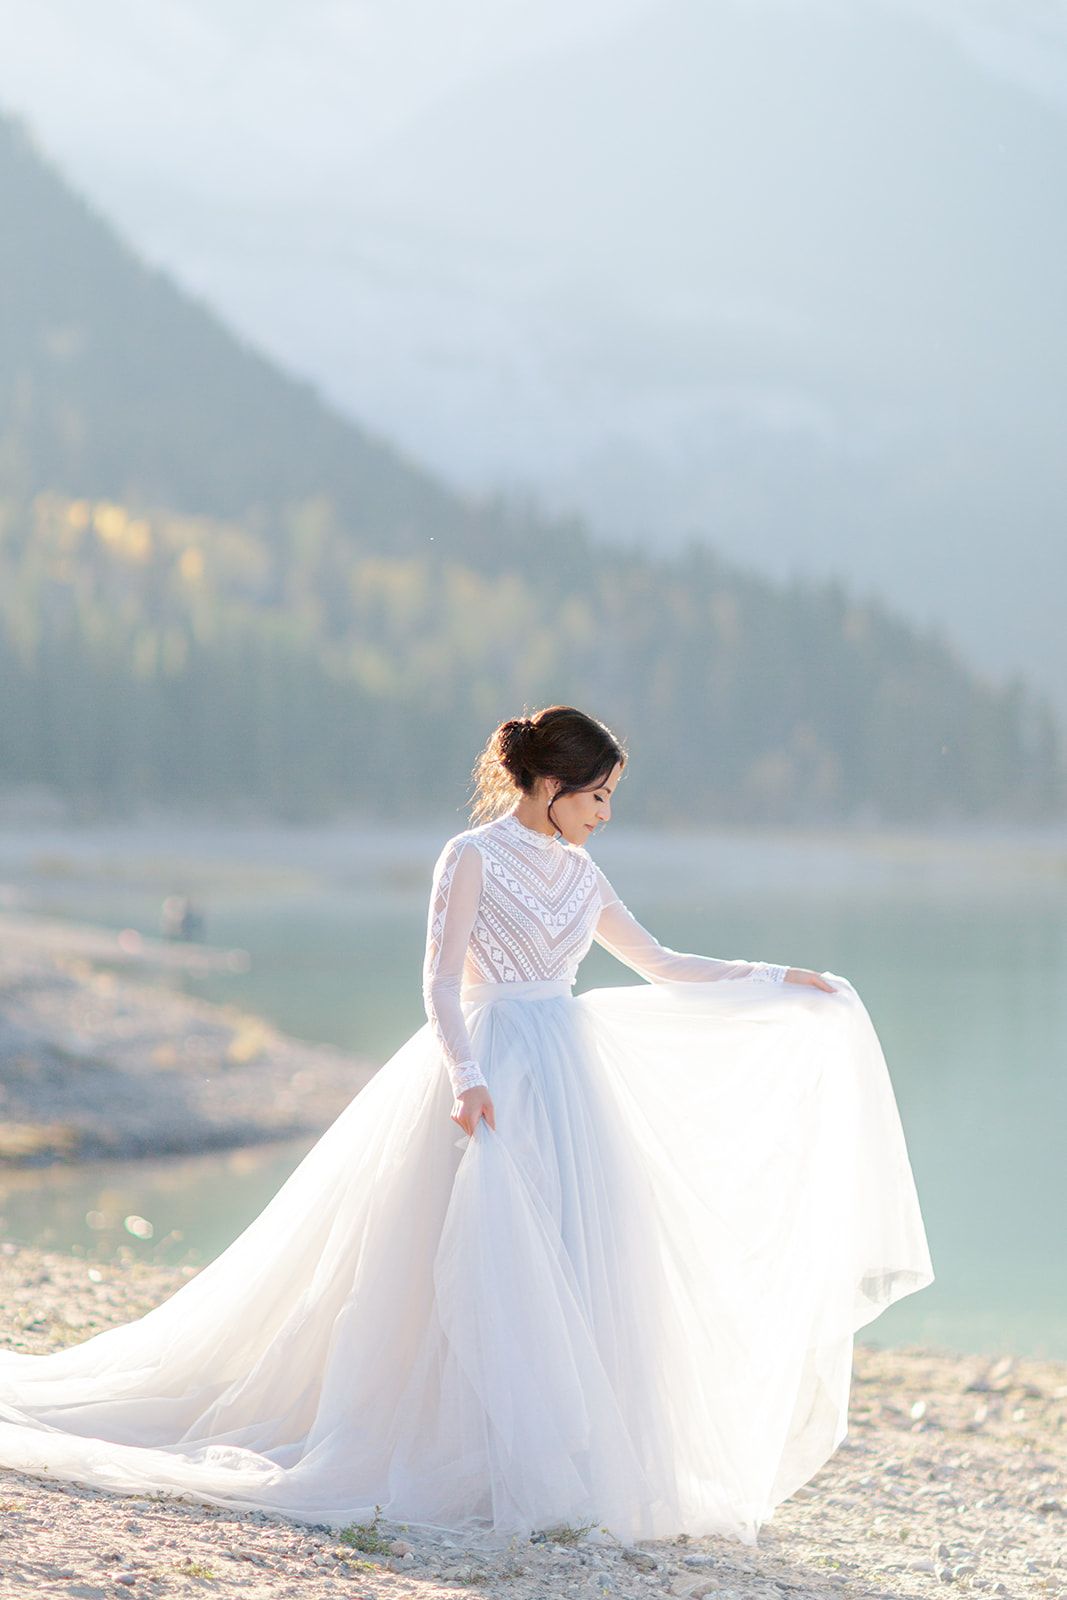 A breathtaking backlit image of a bride-to-be captured at Barrier Lake in Kananaskis Country